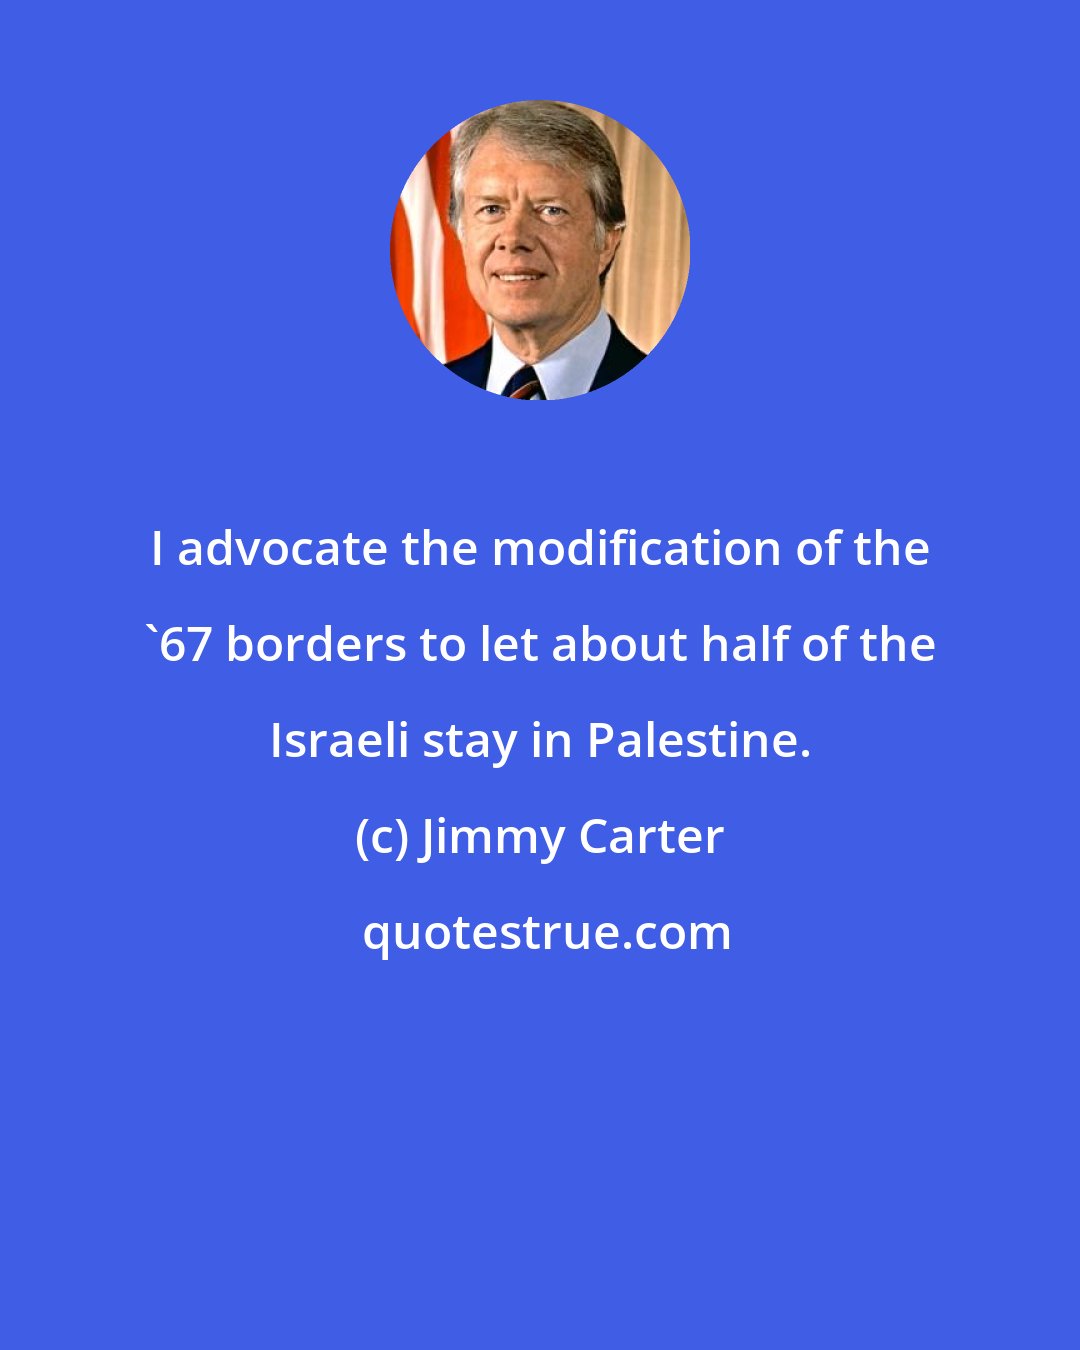 Jimmy Carter: I advocate the modification of the '67 borders to let about half of the Israeli stay in Palestine.